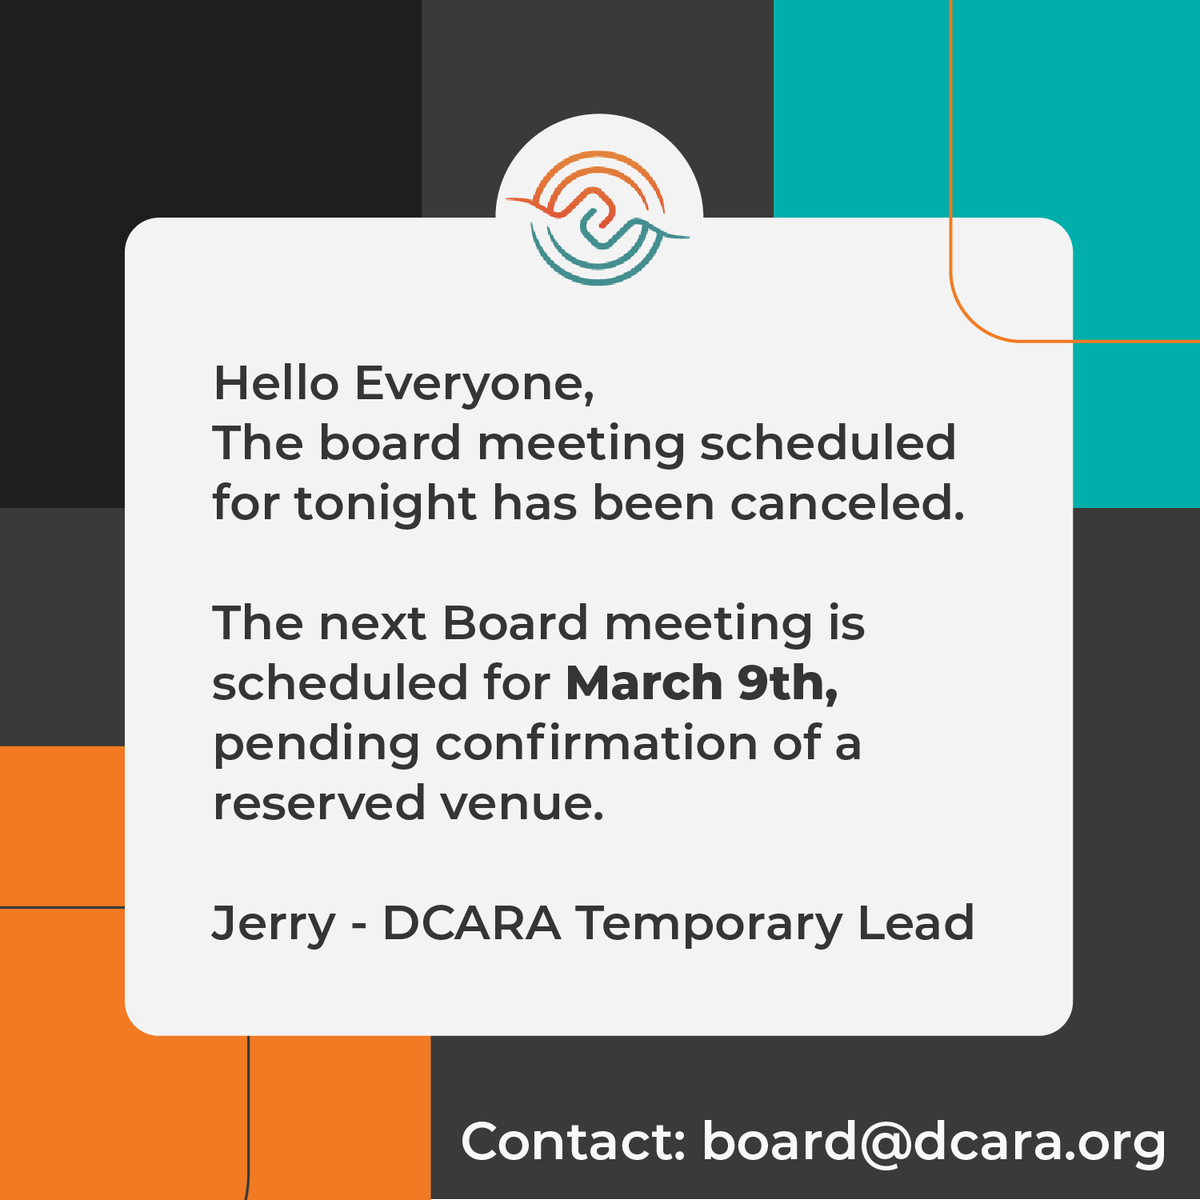 [DCARA BOARD MEETING ANNOUNCEMENT]

DCARA Board has an announcement to share with the community

#DCARABoard #DeafCommunity #DCARA1962